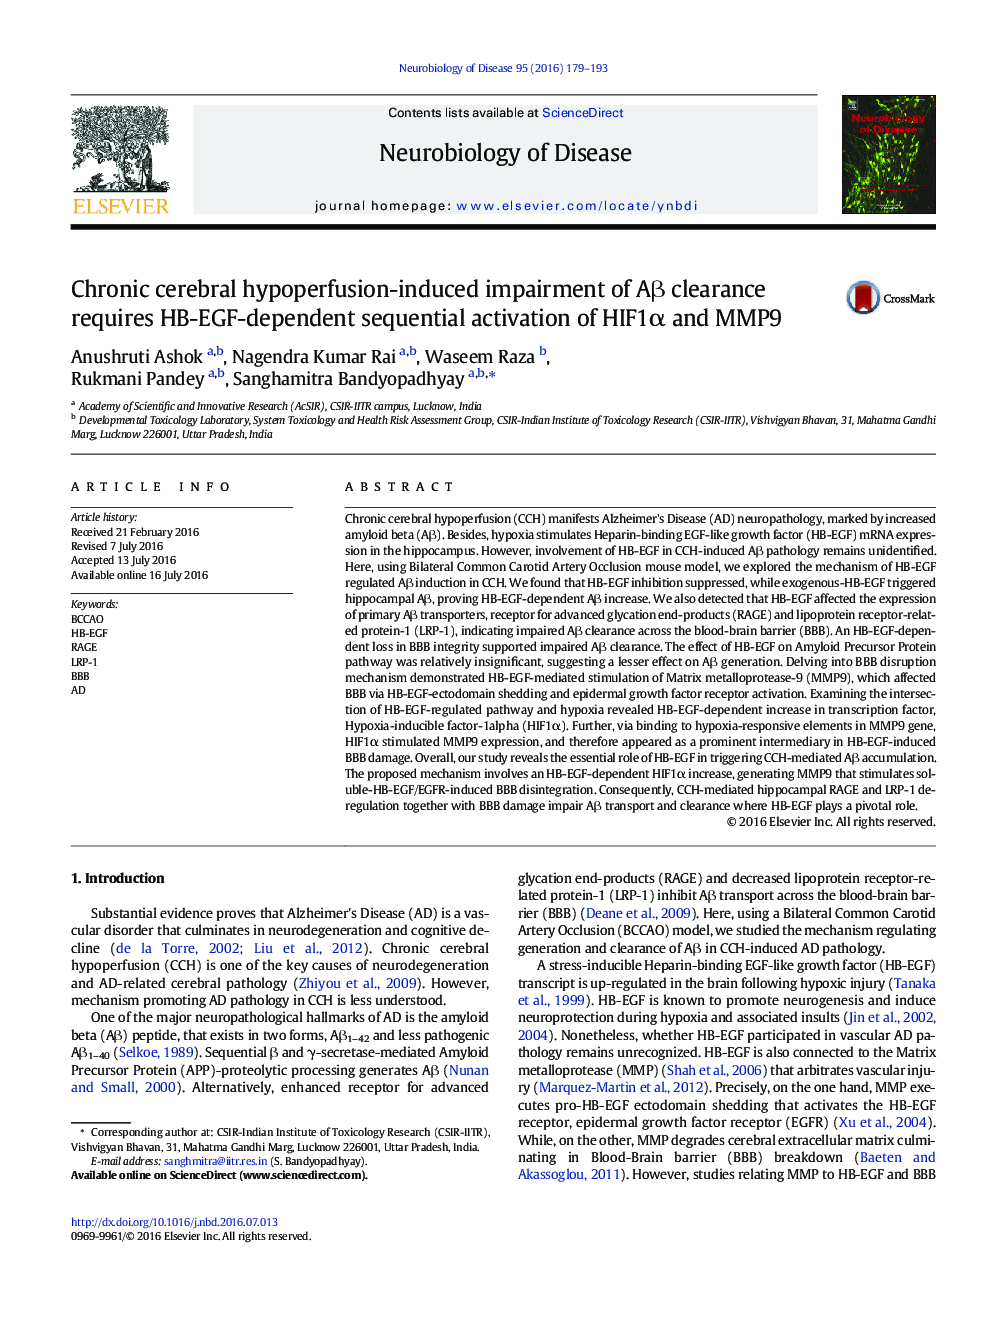 Chronic cerebral hypoperfusion-induced impairment of Aβ clearance requires HB-EGF-dependent sequential activation of HIF1α and MMP9